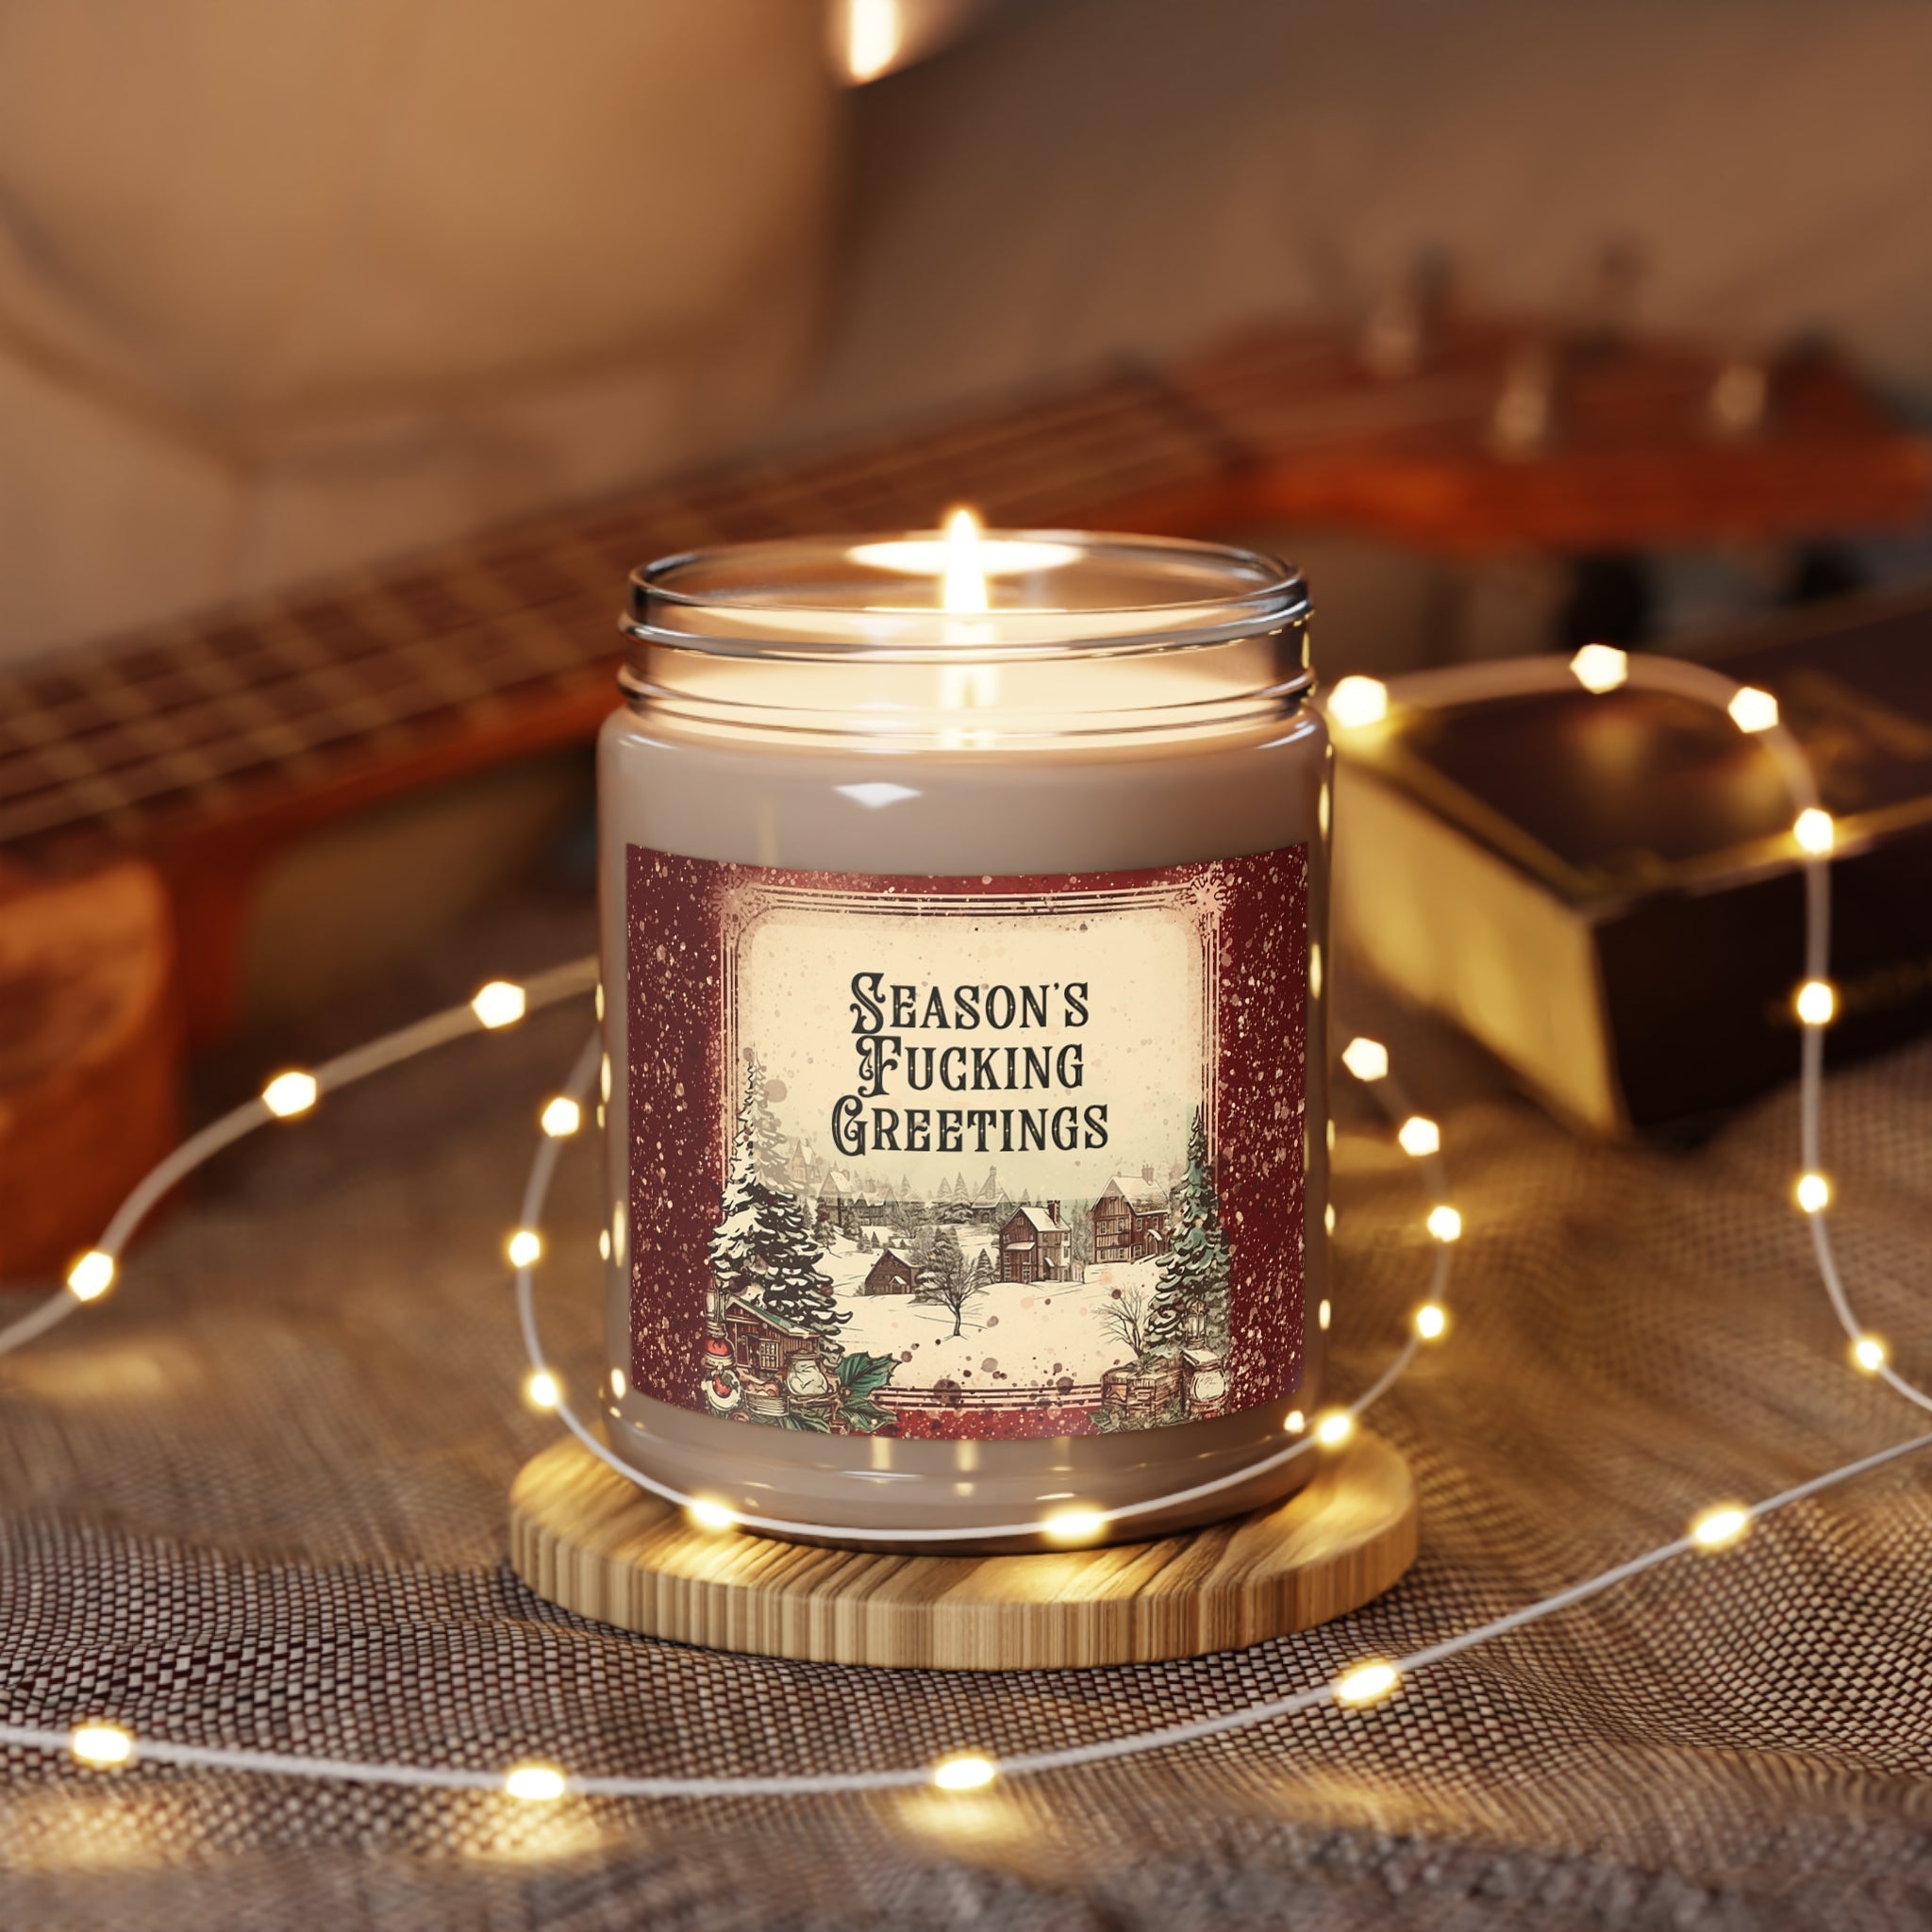 Season's Fucking Greetings - Scented Candles, 9oz